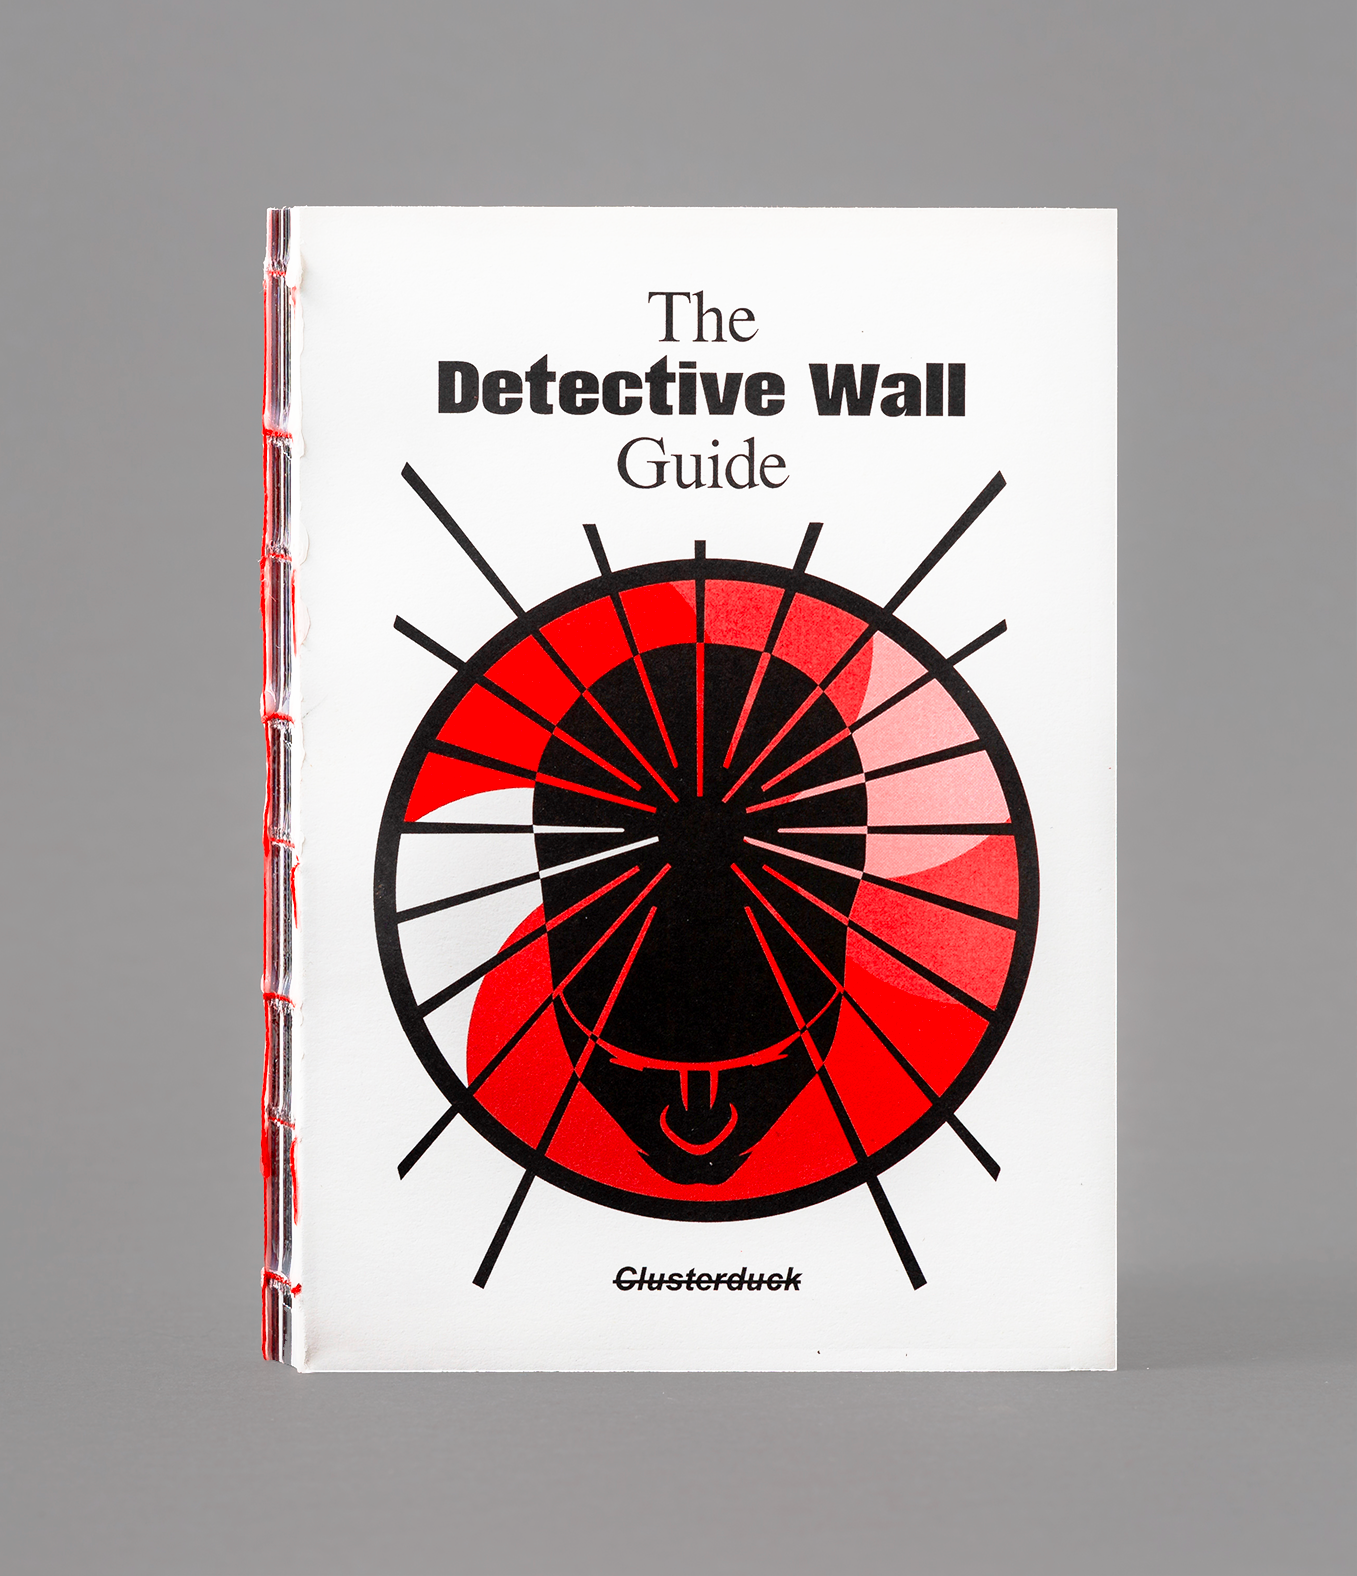 Clusterduck, The Detective Wall Guide